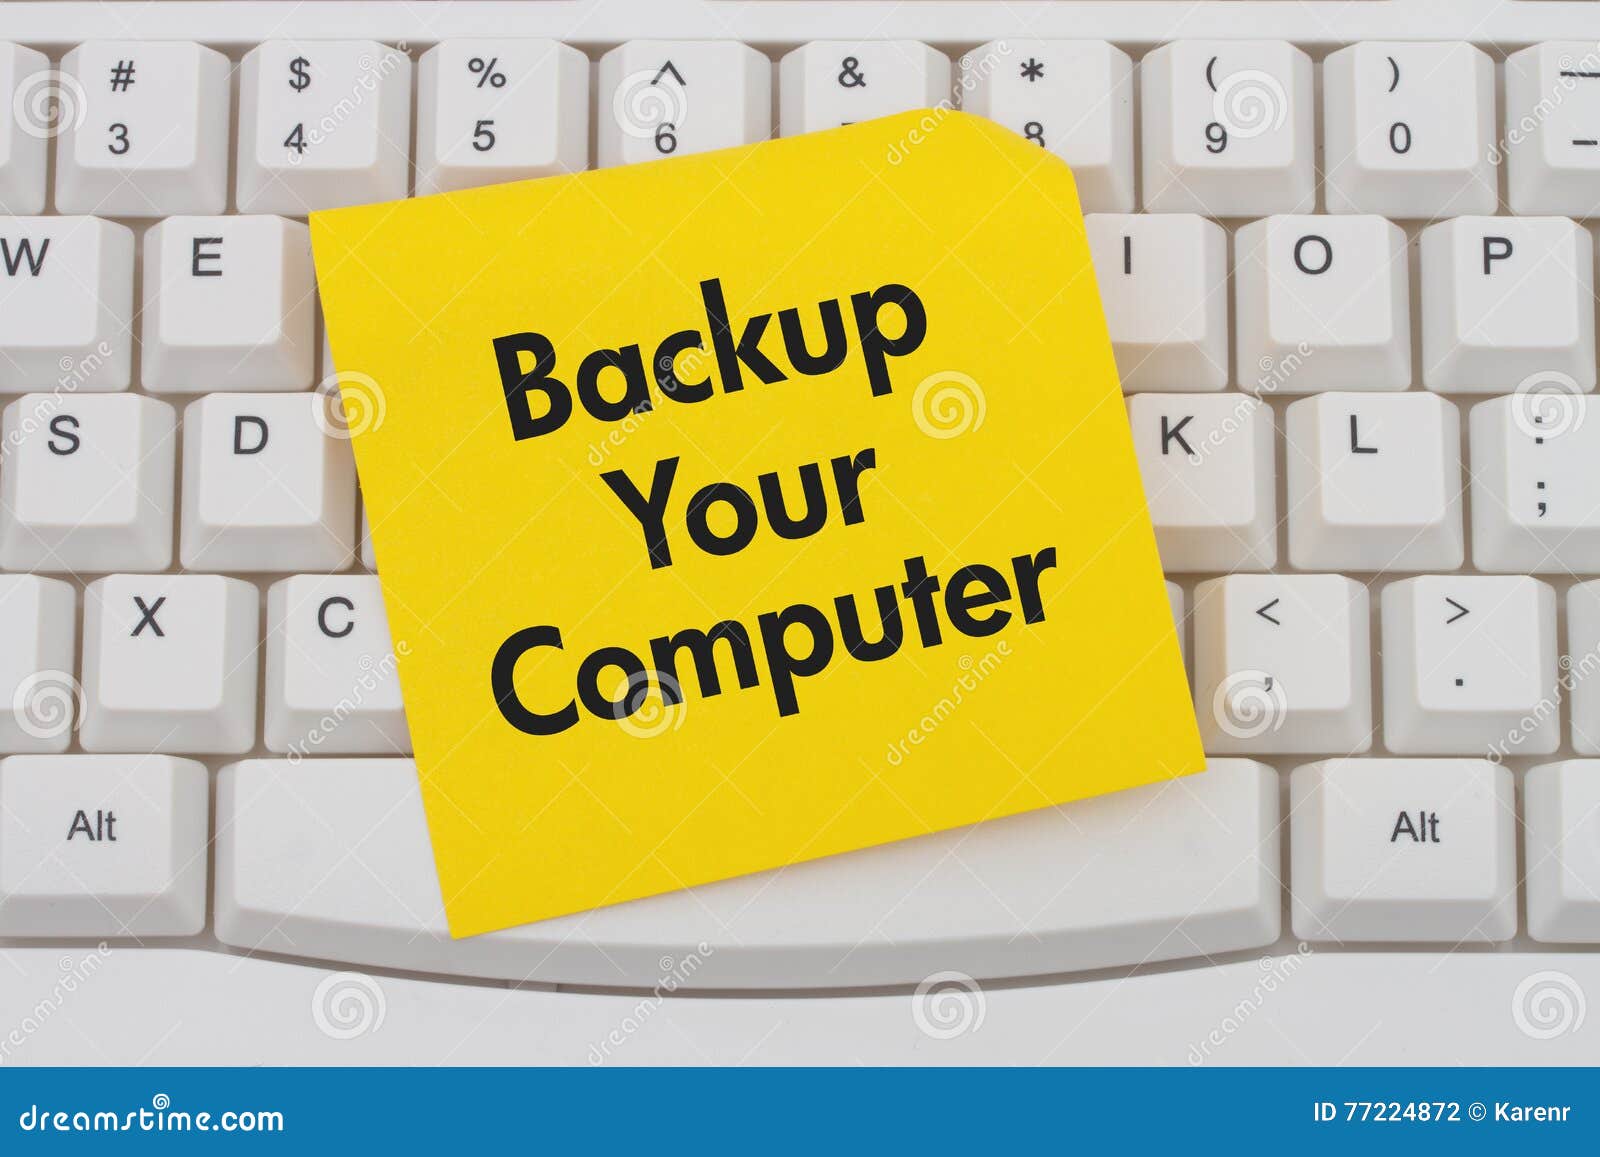 backup your computer